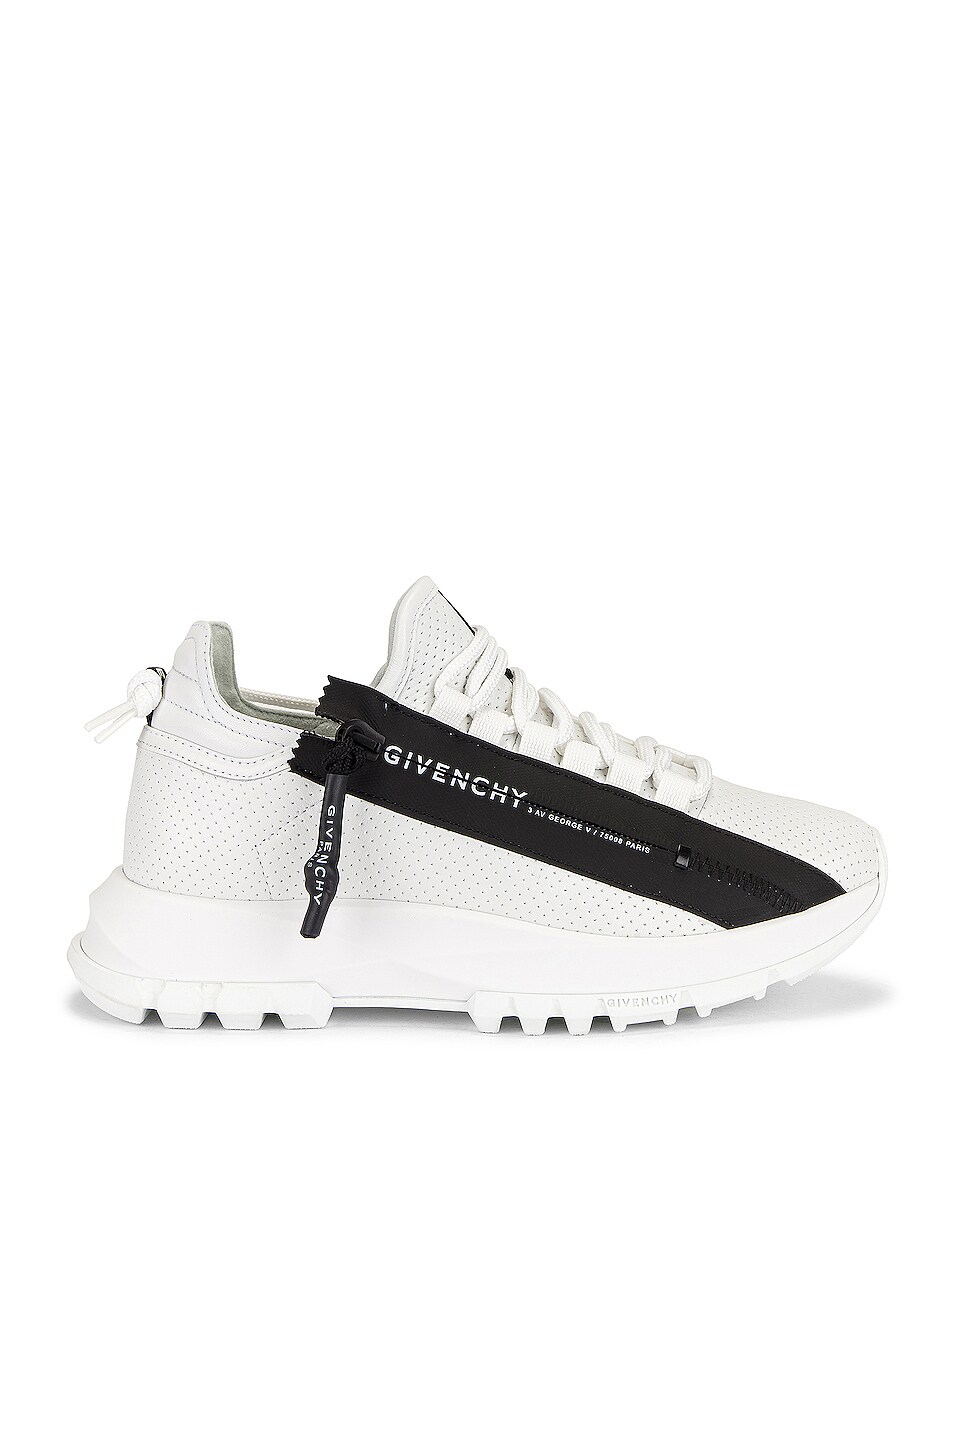 Image 1 of Givenchy Spectre Low Runner Zip Sneakers in White & Black